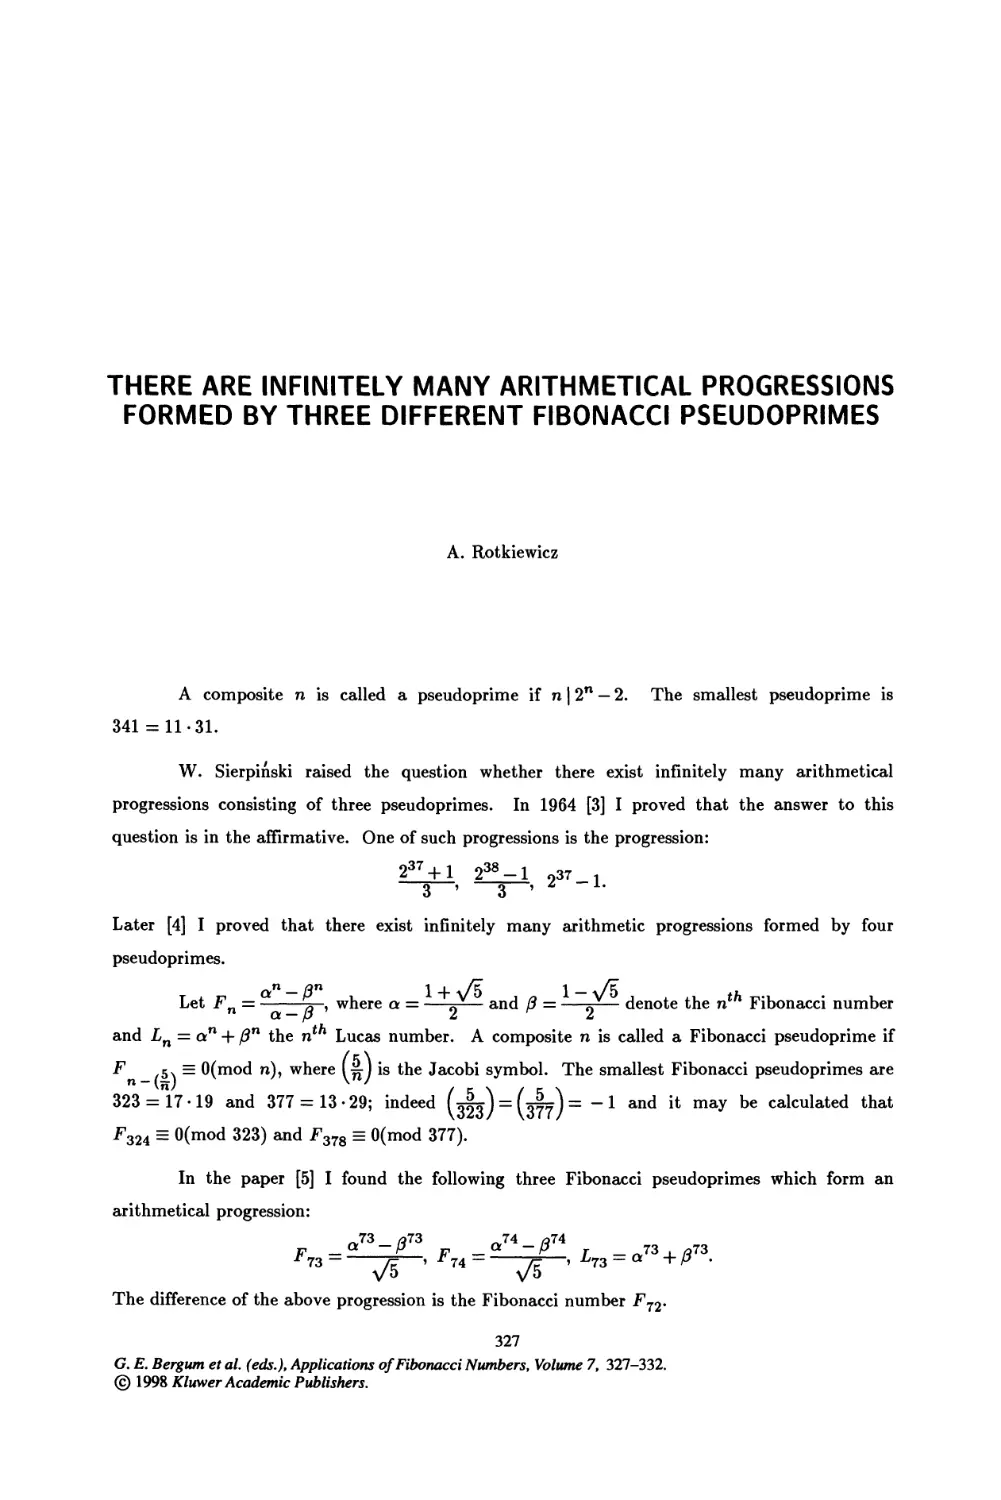 37. There Are Infinitely Many Arithmetical Progressions Formed By Three Different Fibonacci Pseudoprimes